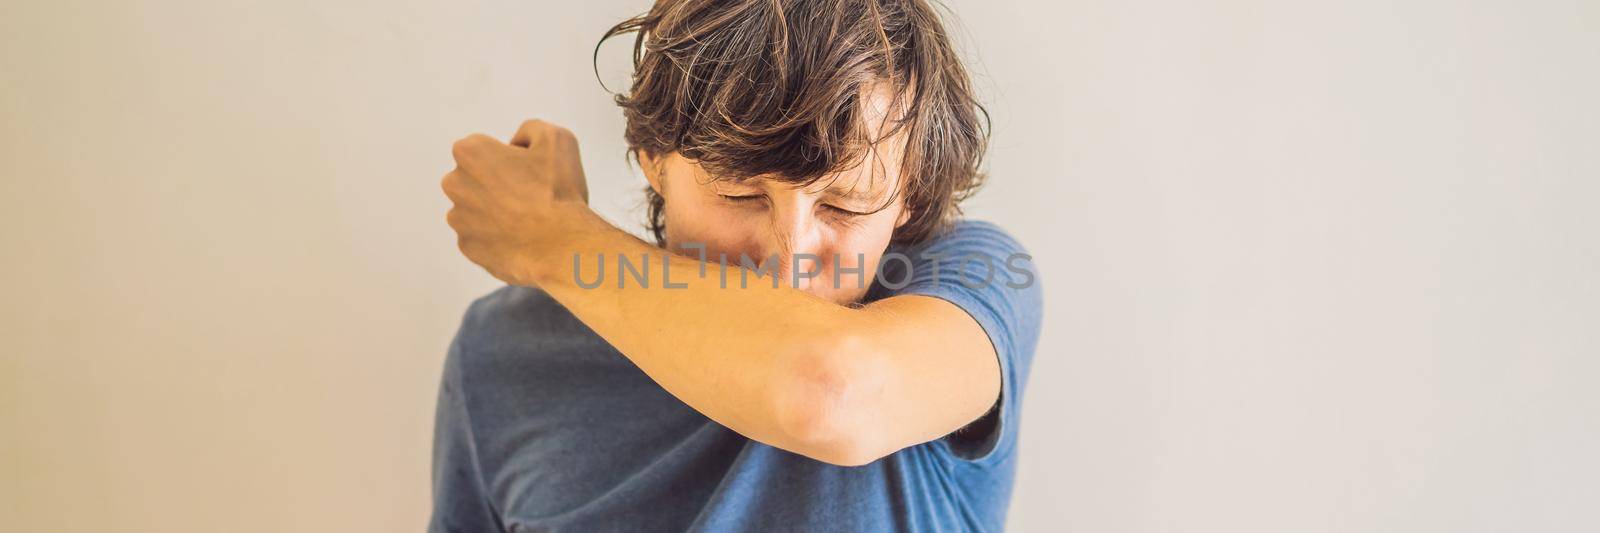 Comparison between wrong and right way to sneeze to prevent virus infection. Caucasian man sneezing, coughing into her arm or elbow to prevent spread Covid-19,Coronavirus BANNER, LONG FORMAT by galitskaya